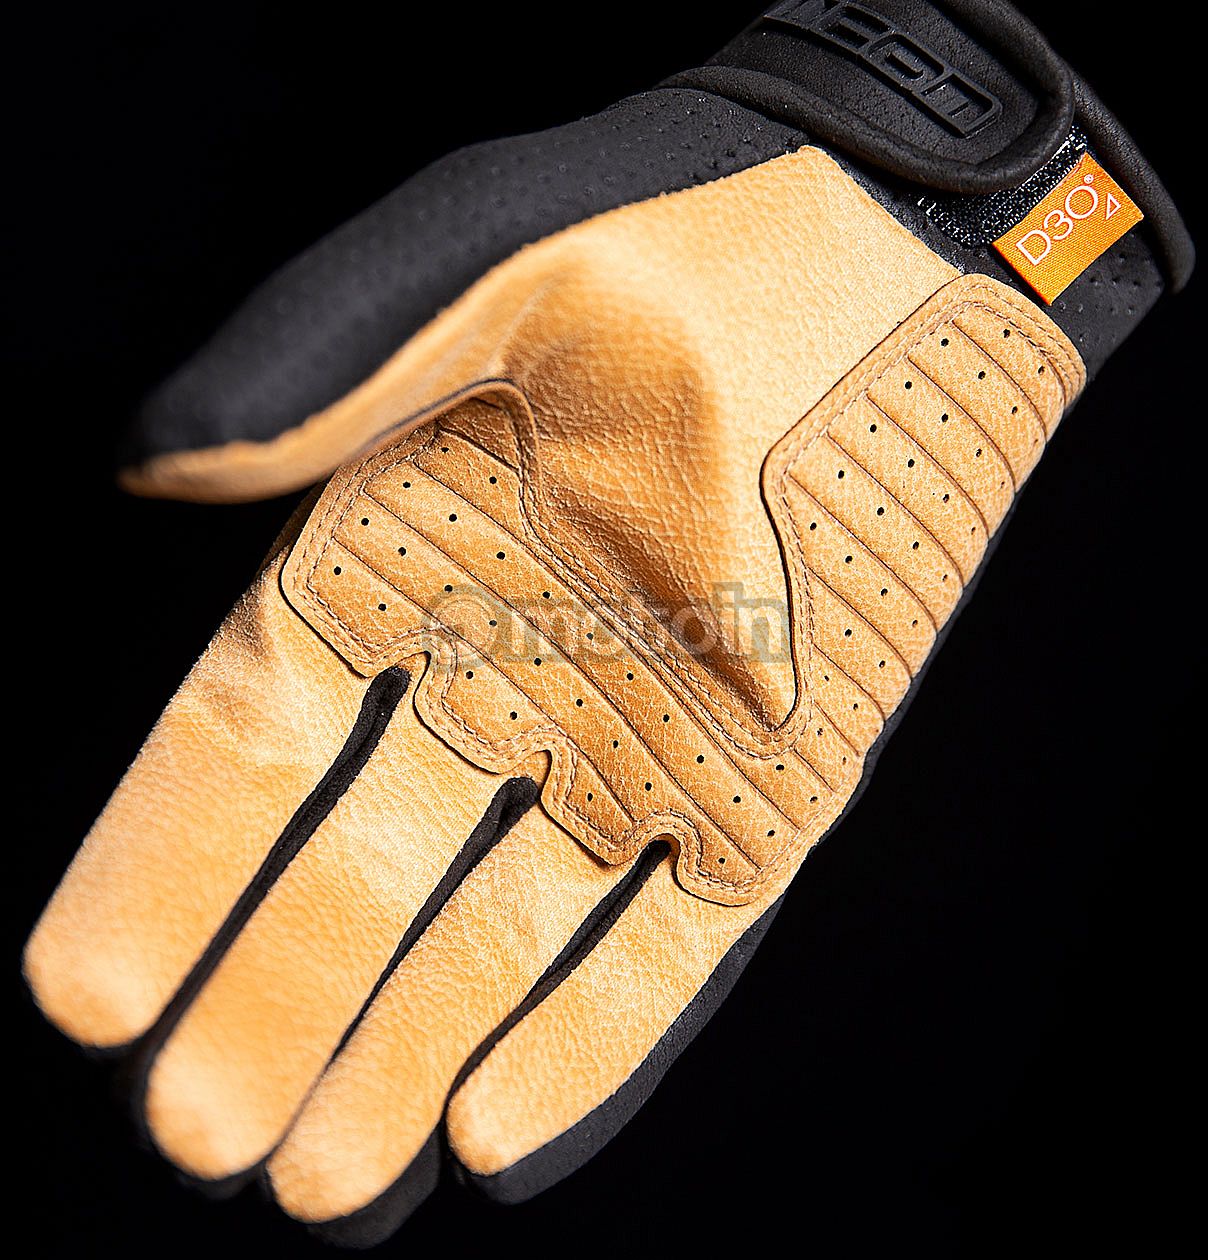 Icon Airform, gloves perforated - motoin.de